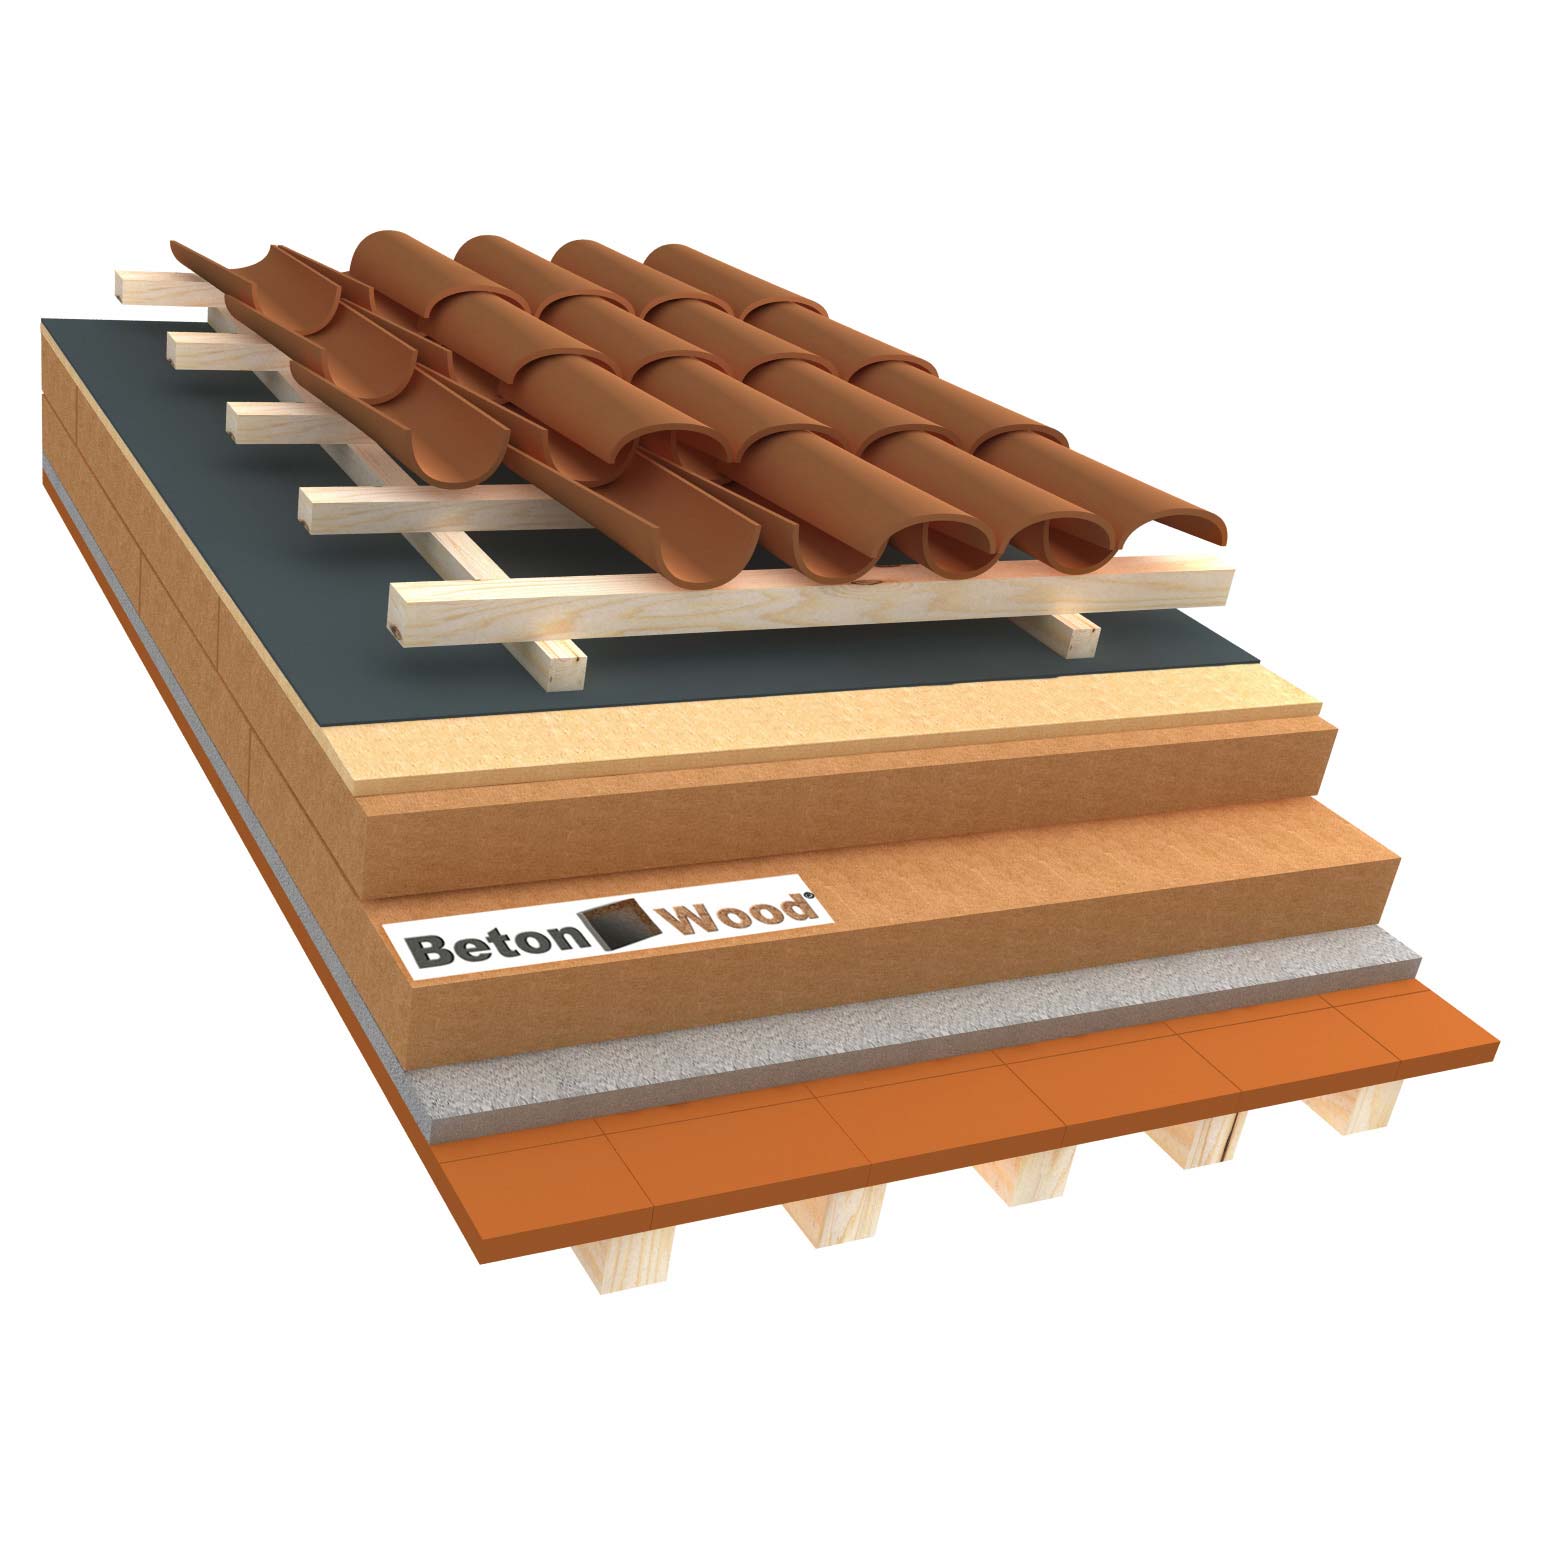 Ventilated roof with fiber wood Isorel and Universal on terracotta tiles